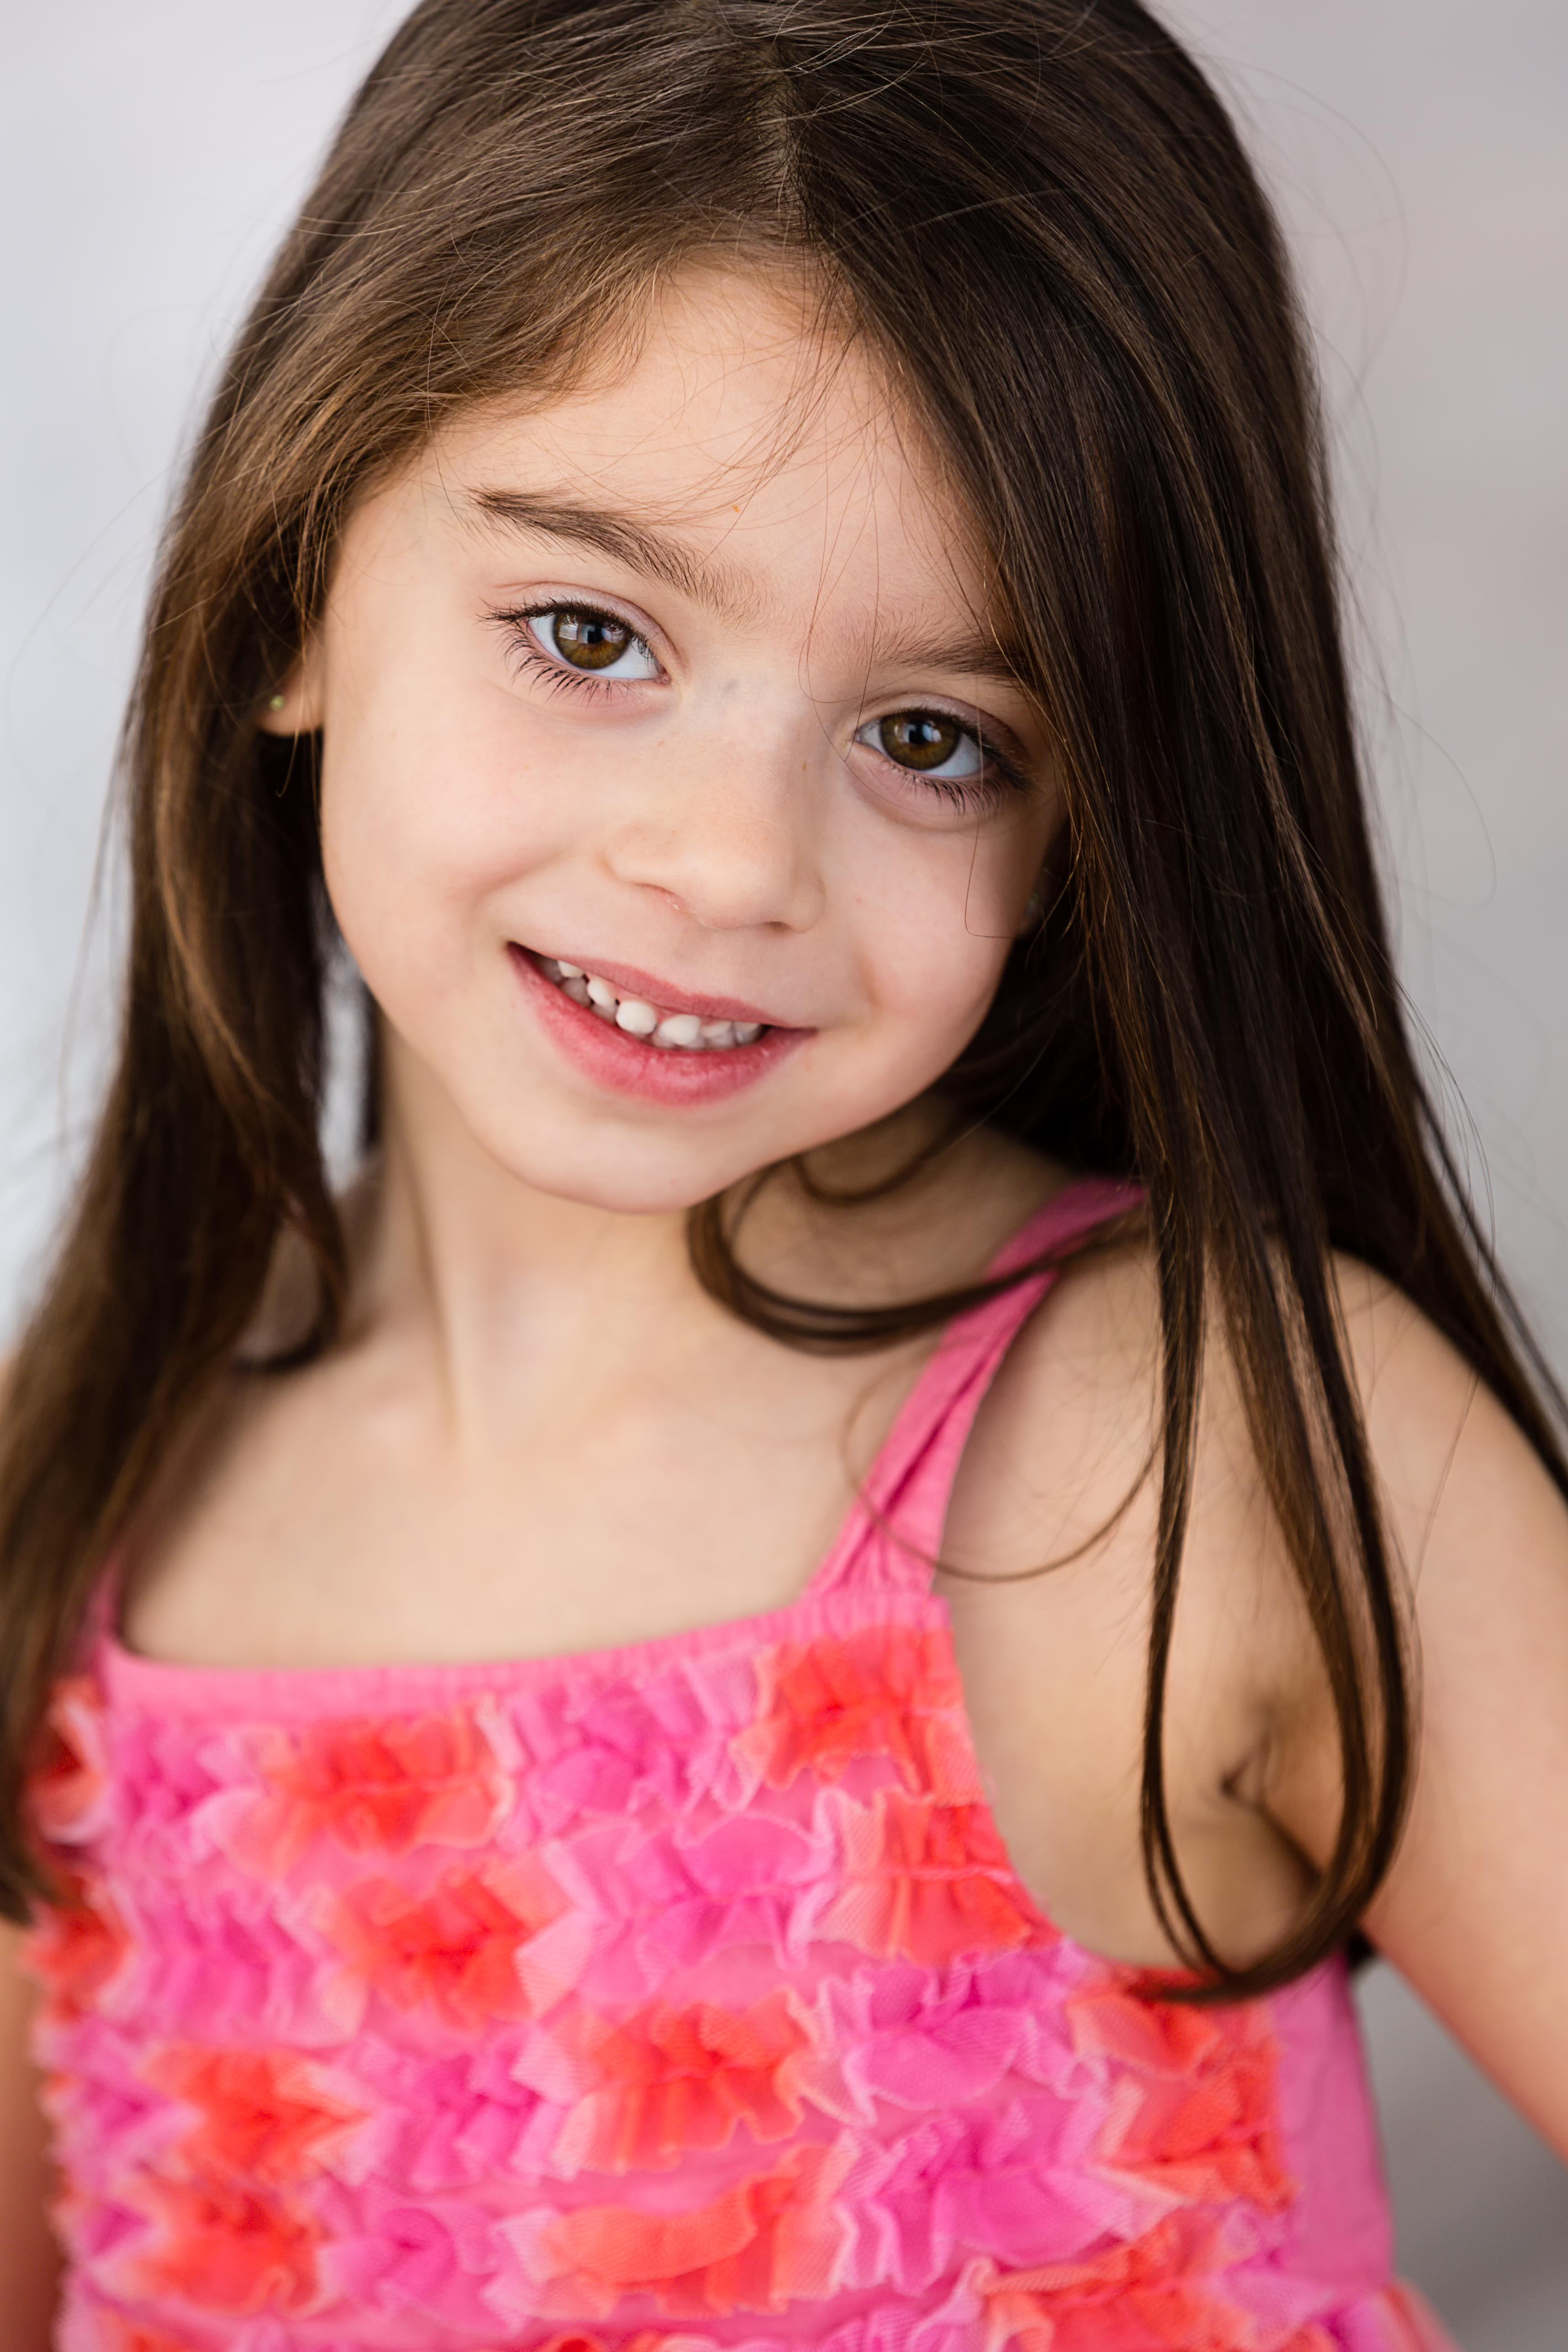 Child actress commercial shot